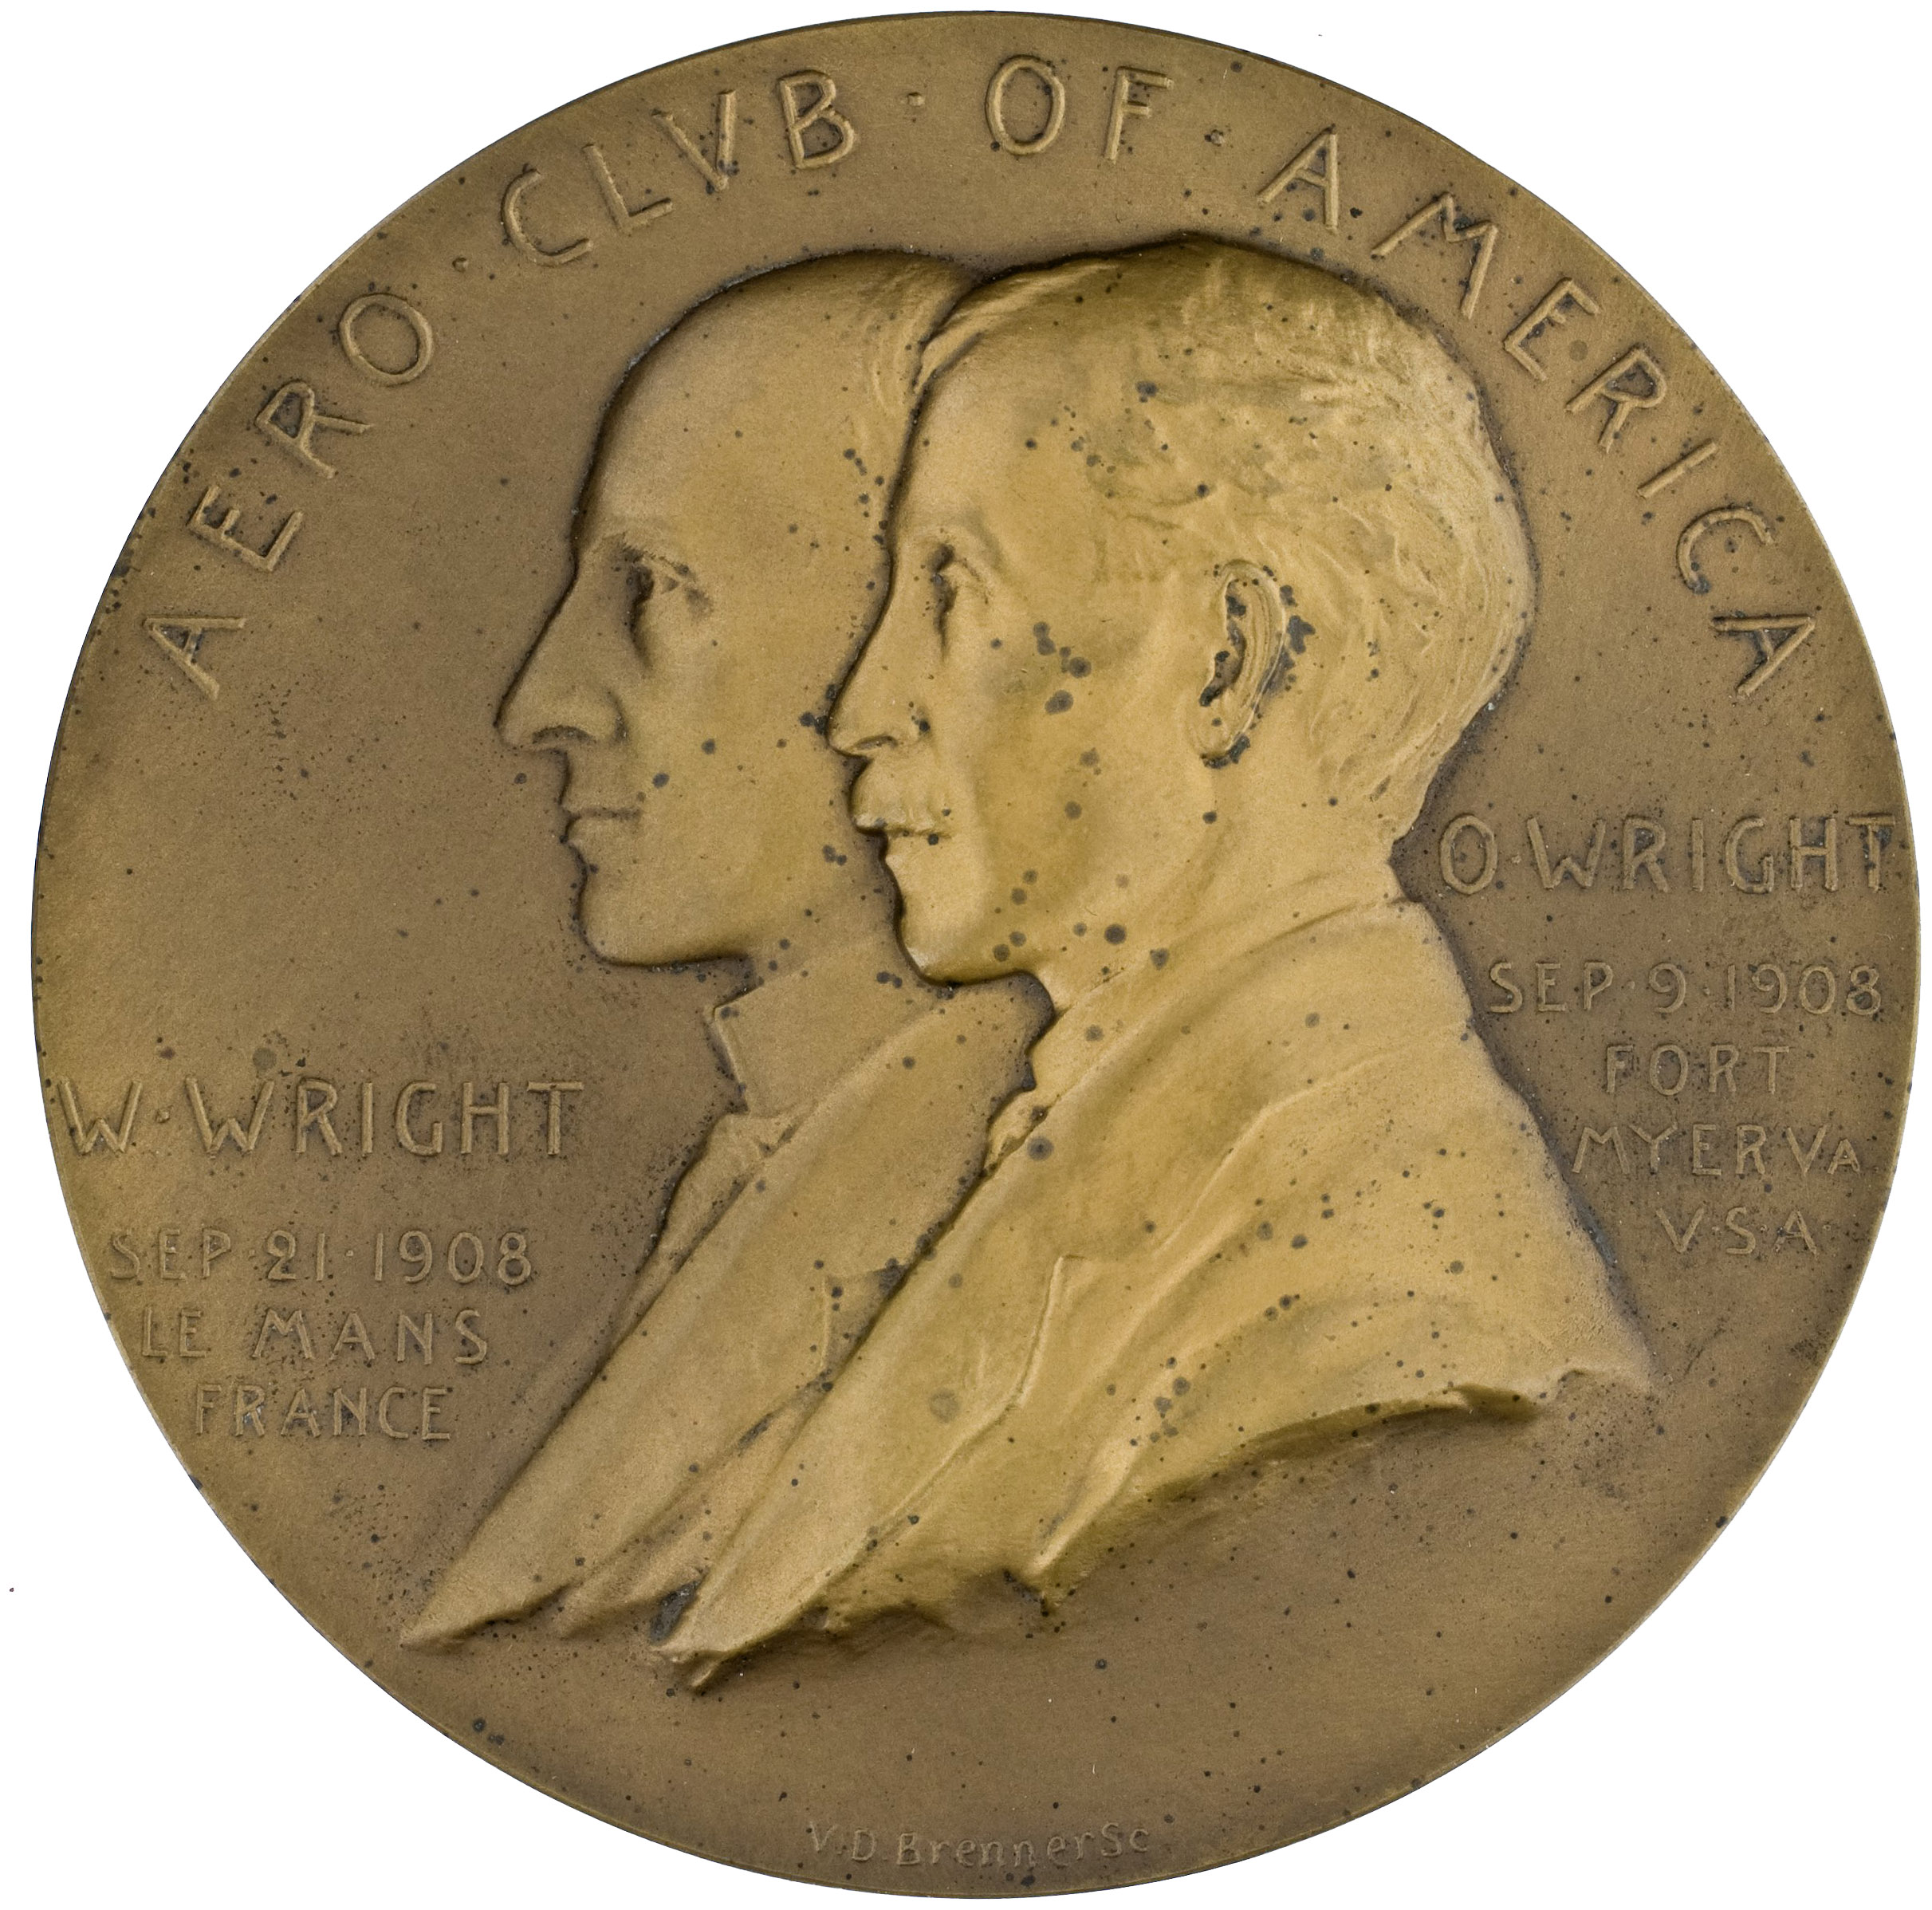 Hahlo-107-109, The Wright Brothers medal